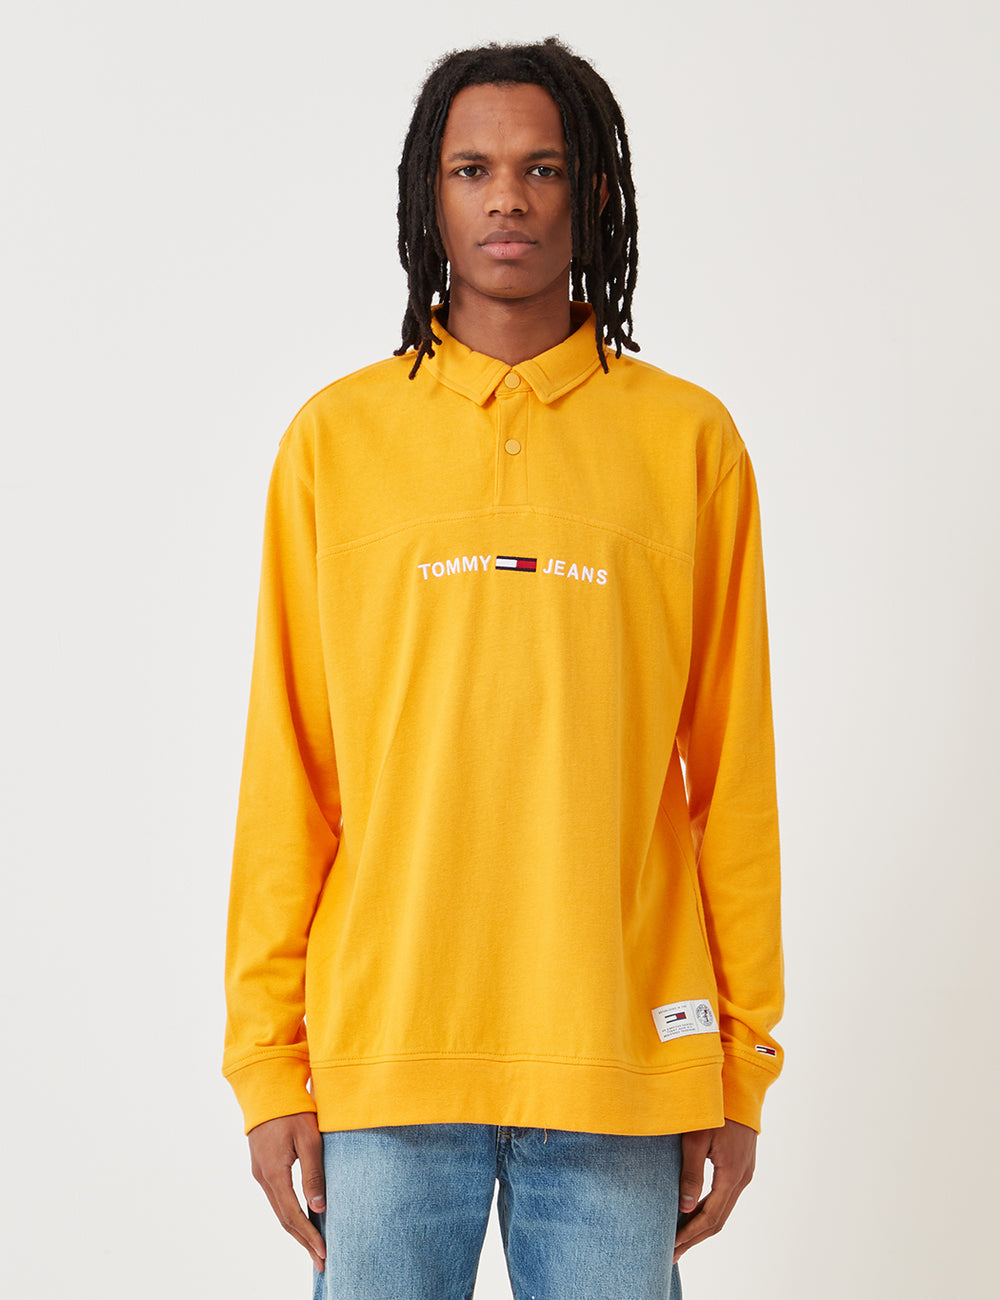 CARHARTT WIP RADIANT CREW NECK T-SHIRT IN SOLID COLOR COTTON